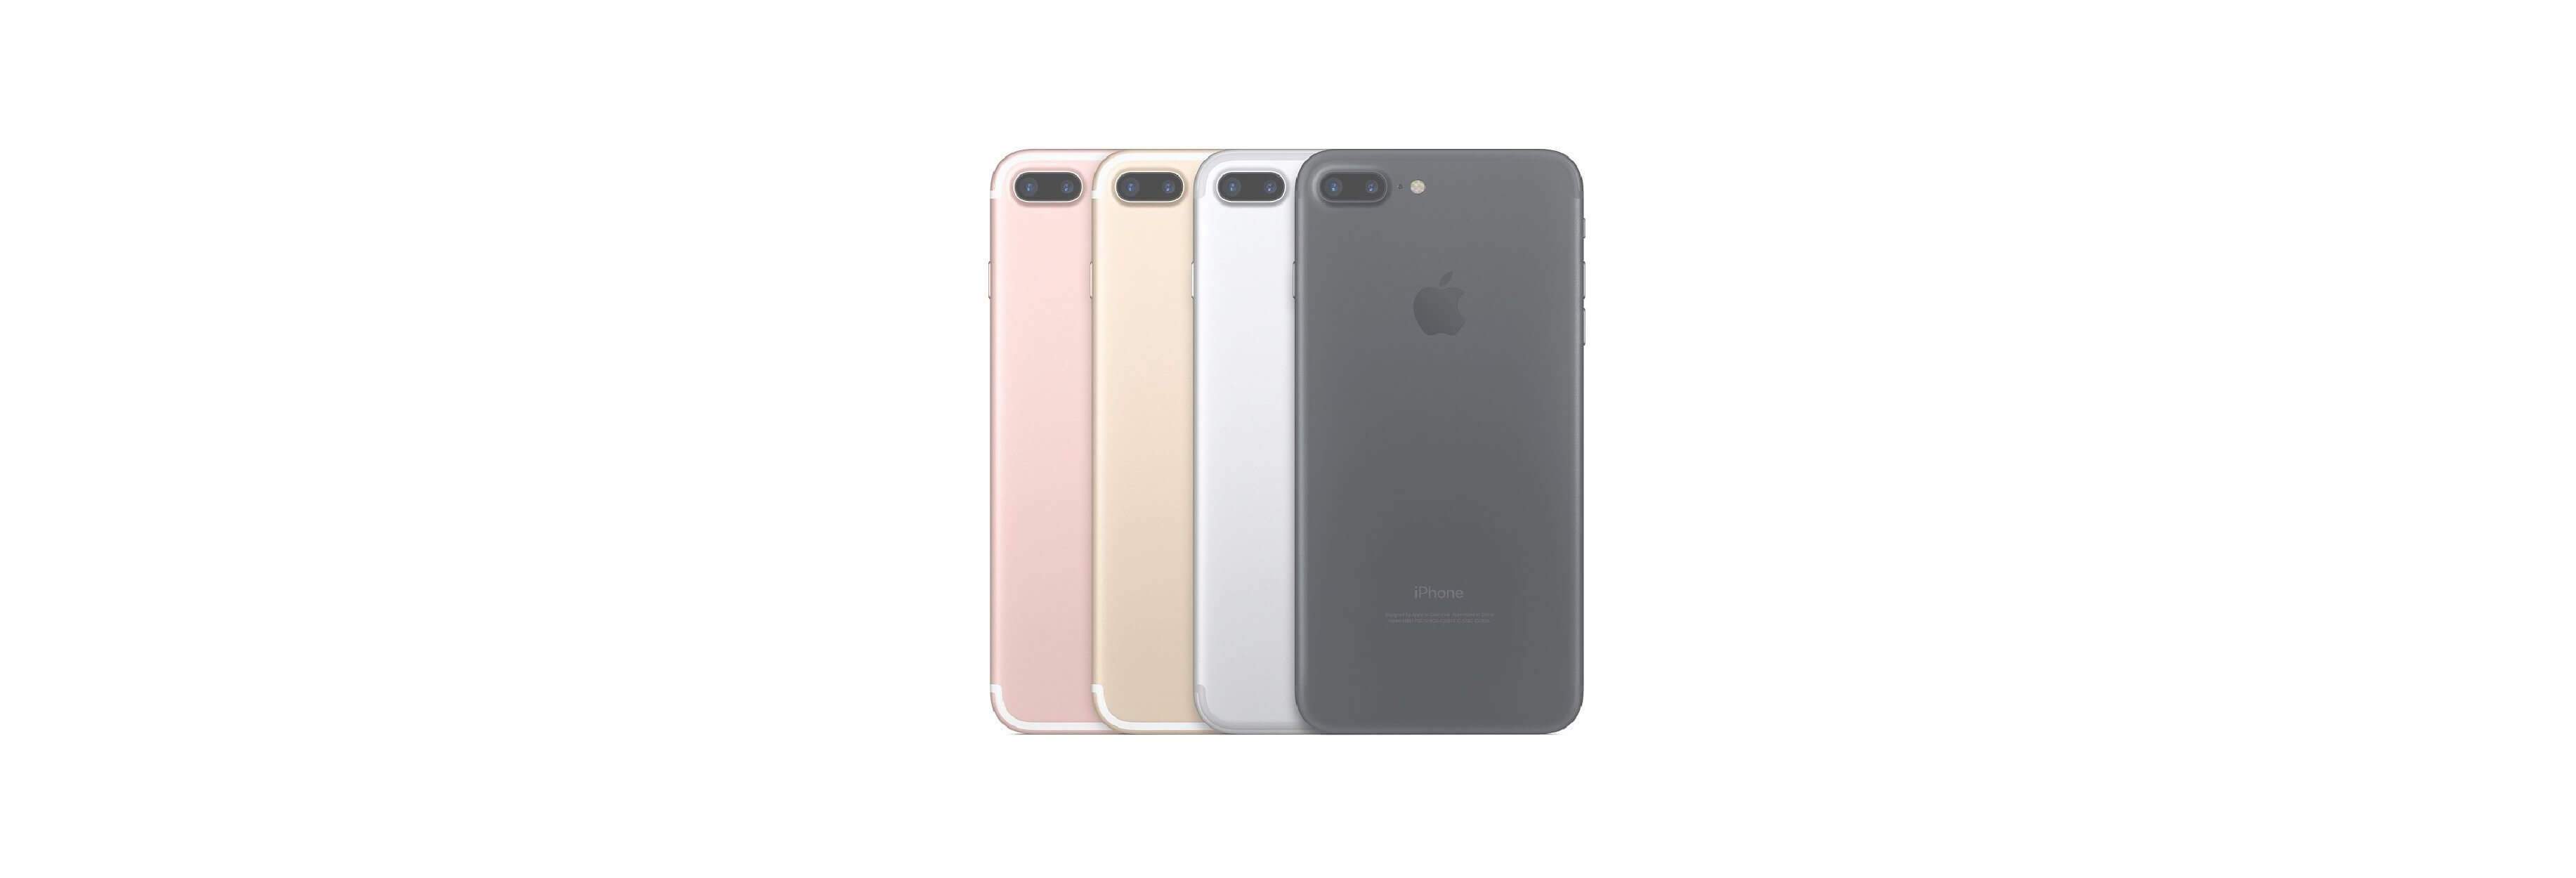 Need second Refurbished device? Take Your Pick: iphone 7 plus